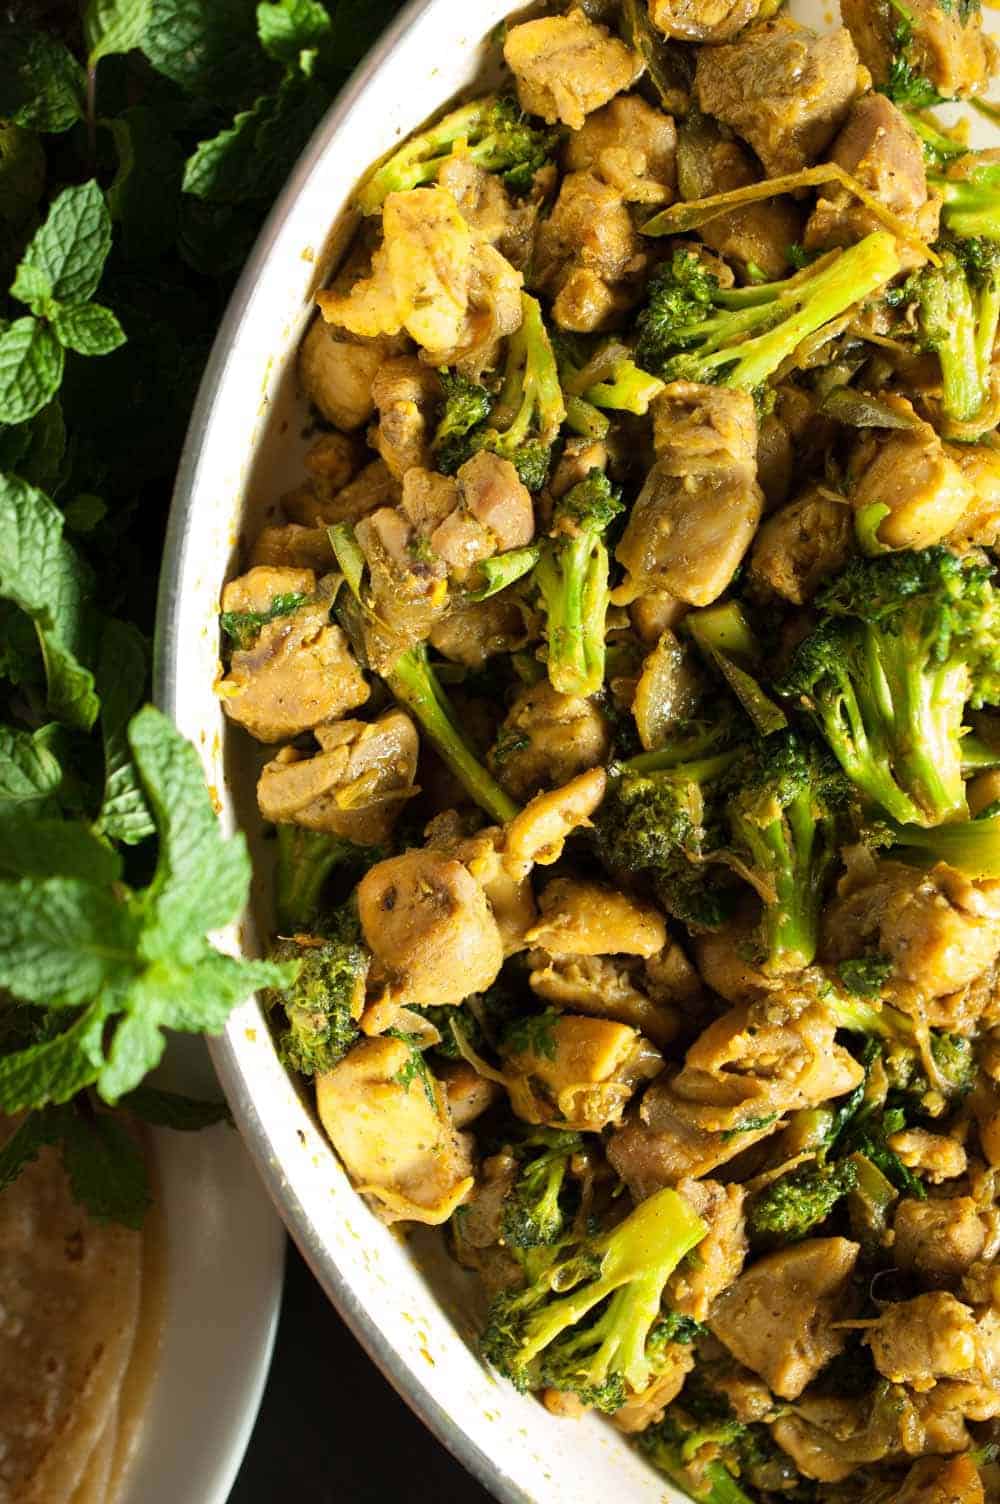 Chicken and broccoli cooked and sauteed in ginger garlic, pepper, and spices. This Indian Healthy Chicken and Broccoli Stir Fry is an easy and tasty side-dish with rice, roti, and any Indian bread. A quick recipe which you can make for a weekday dinner.